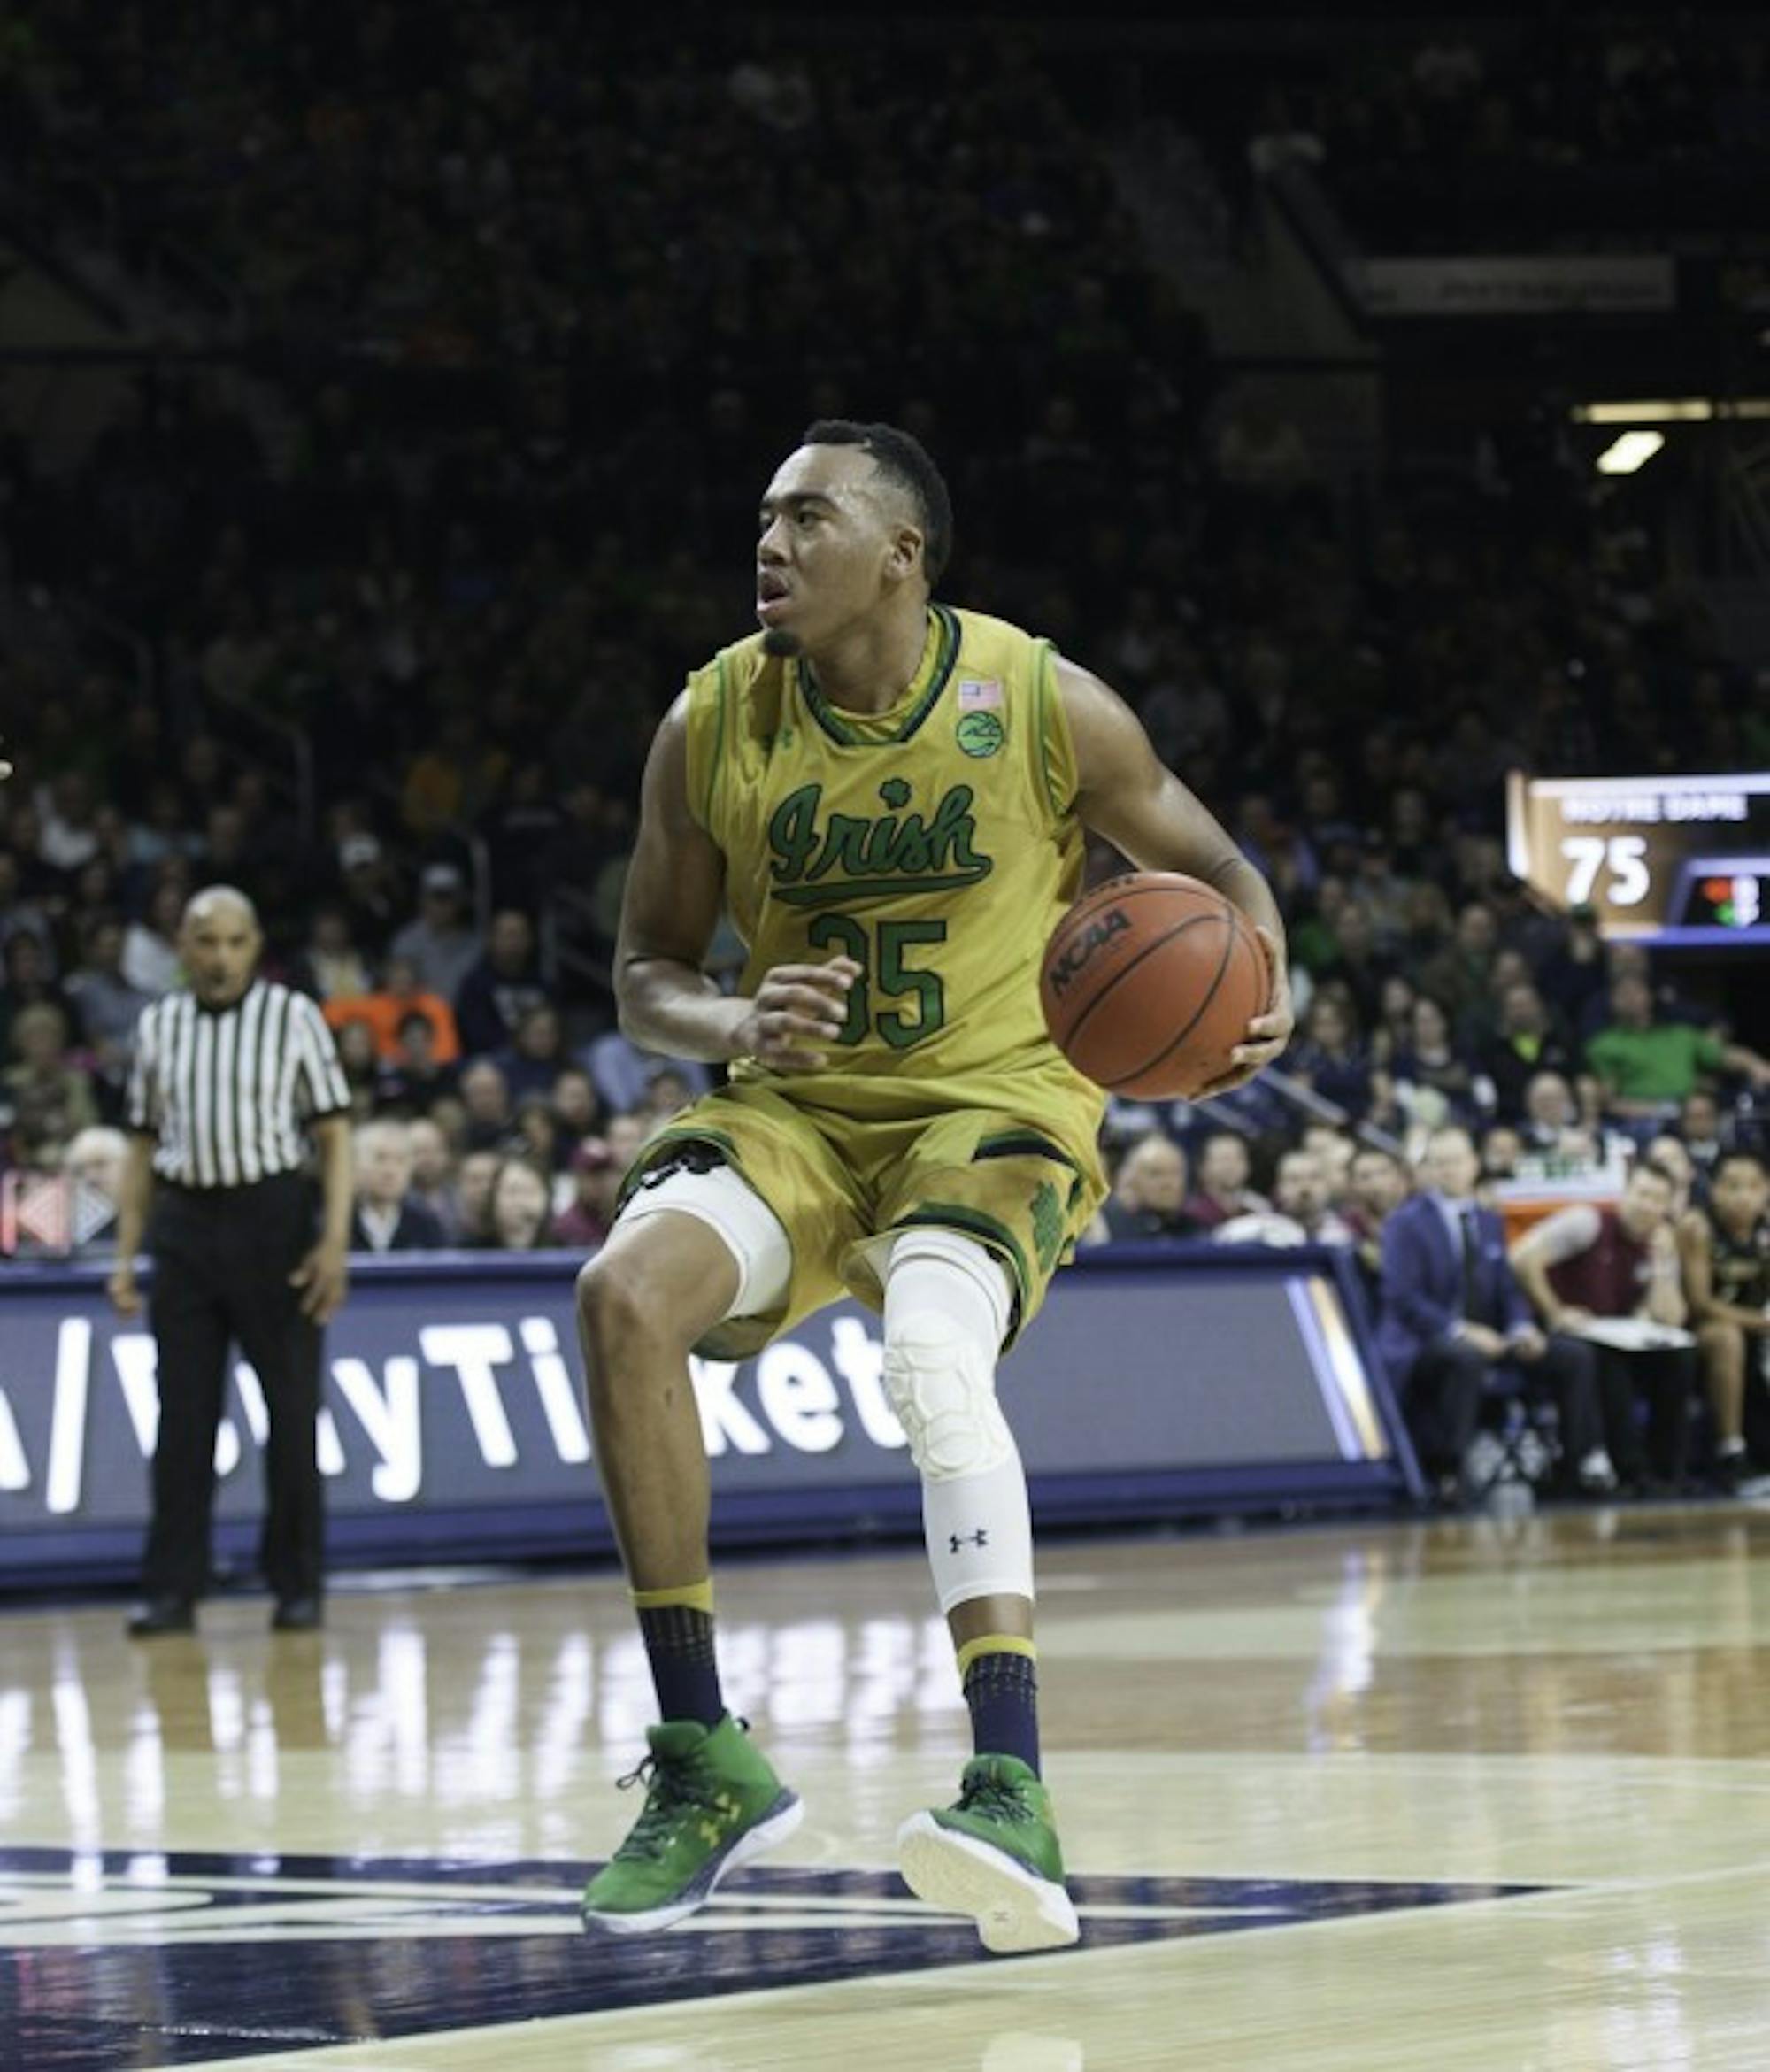 Irish junior forward Bonzie Colson surveys the court during Notre Dame’s 84-72 win over Florida State on Saturday at Purcell Pavilion.